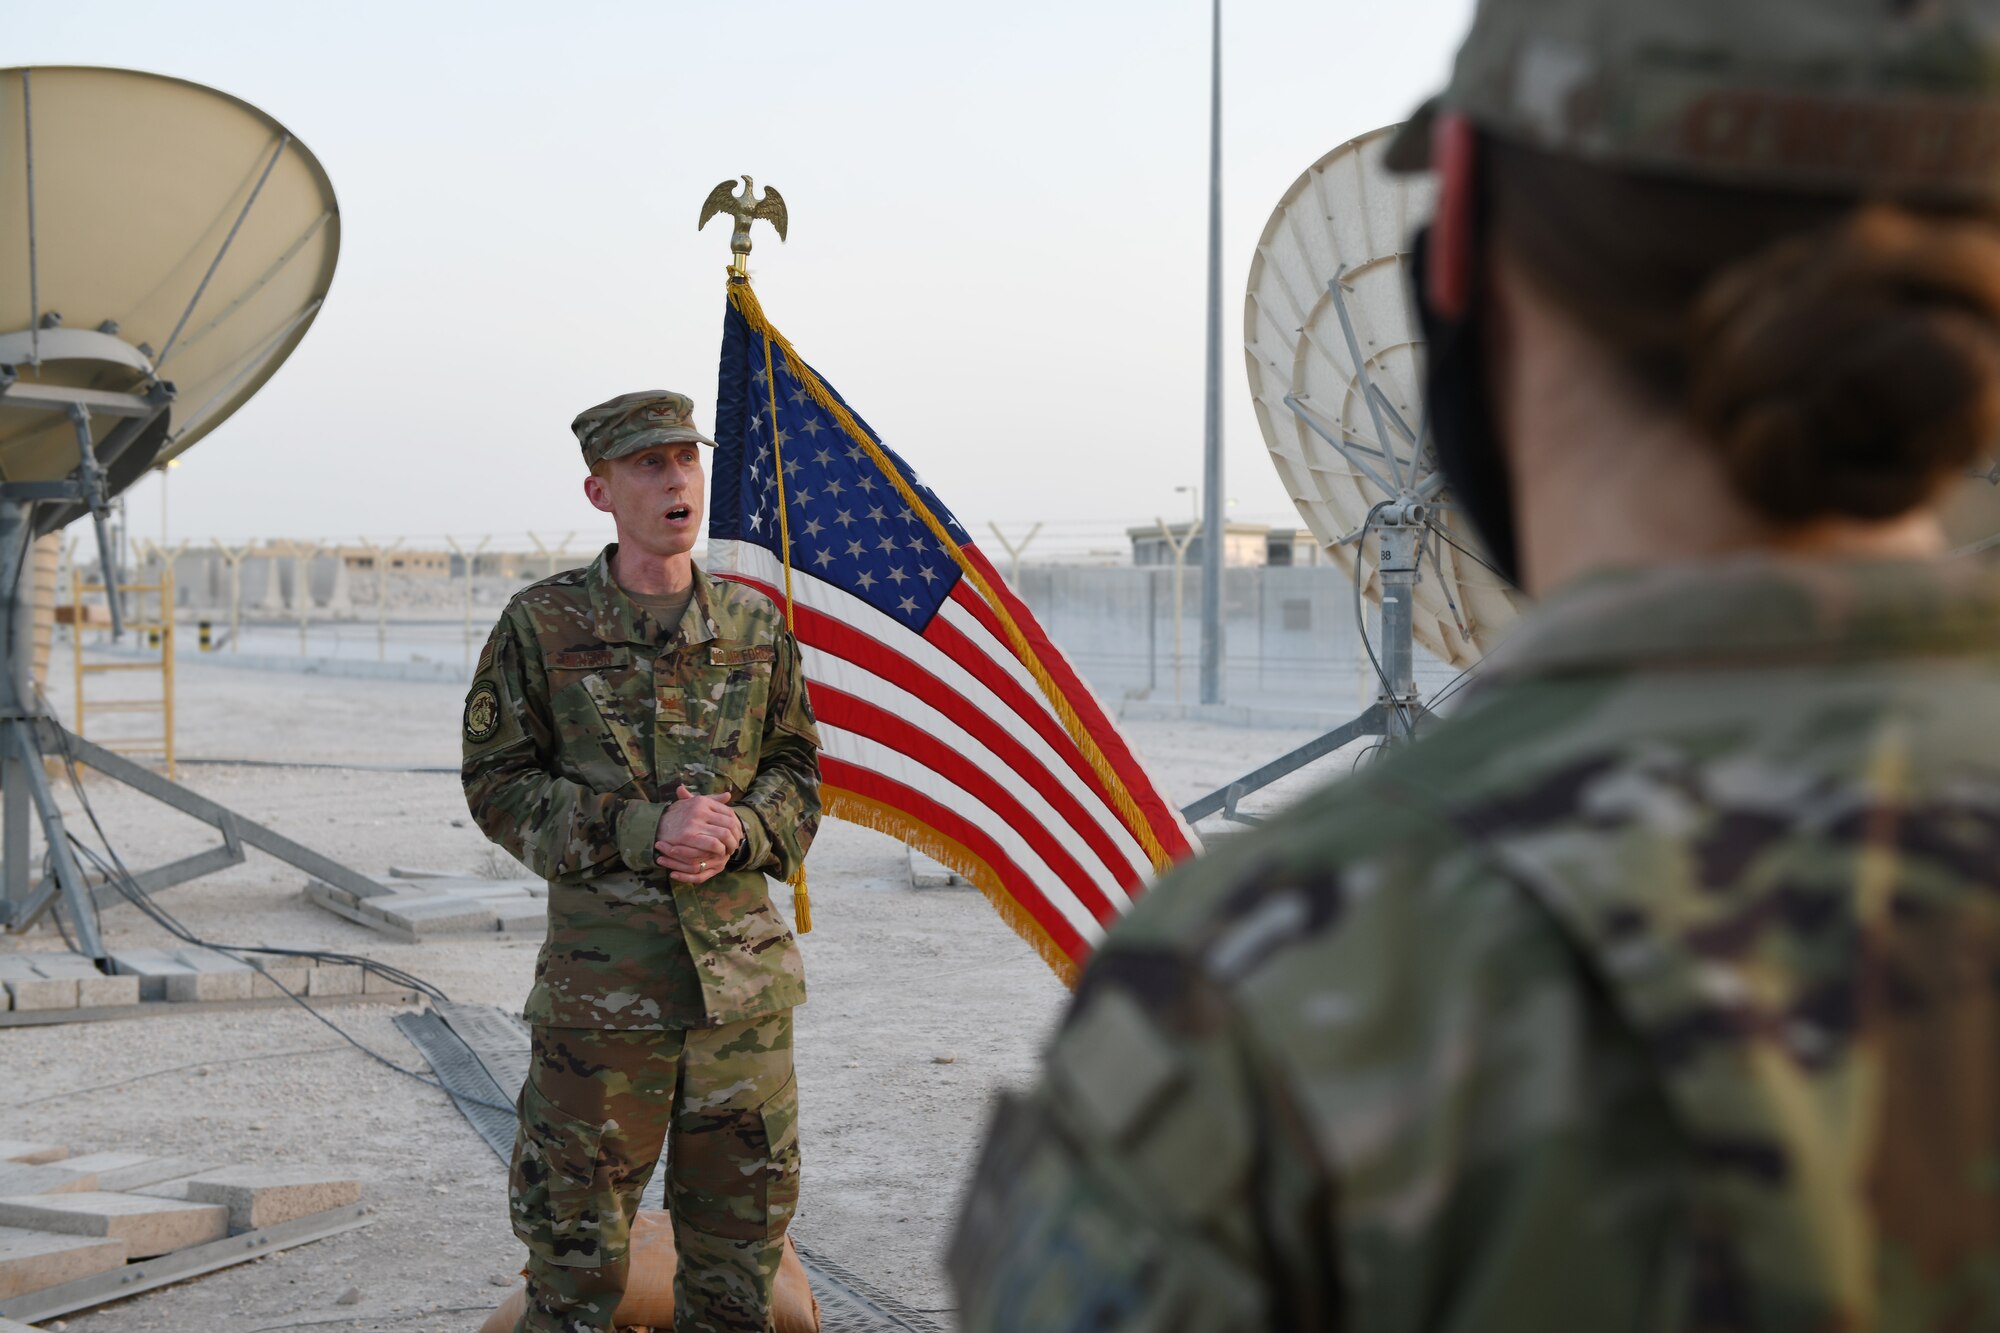 Col. Todd Benson, the U.S. Air Forces Central Command director of space forces, addresses members of the 379th Operations Support Squadron before they swore in as members of the Space Force at Al Udeid Air Base, Qatar, on Sept. 1, 2020. The Space Force is the United States' newest service in more than 70 years. (U.S. Air Force photo by Staff Sgt. Kayla White)